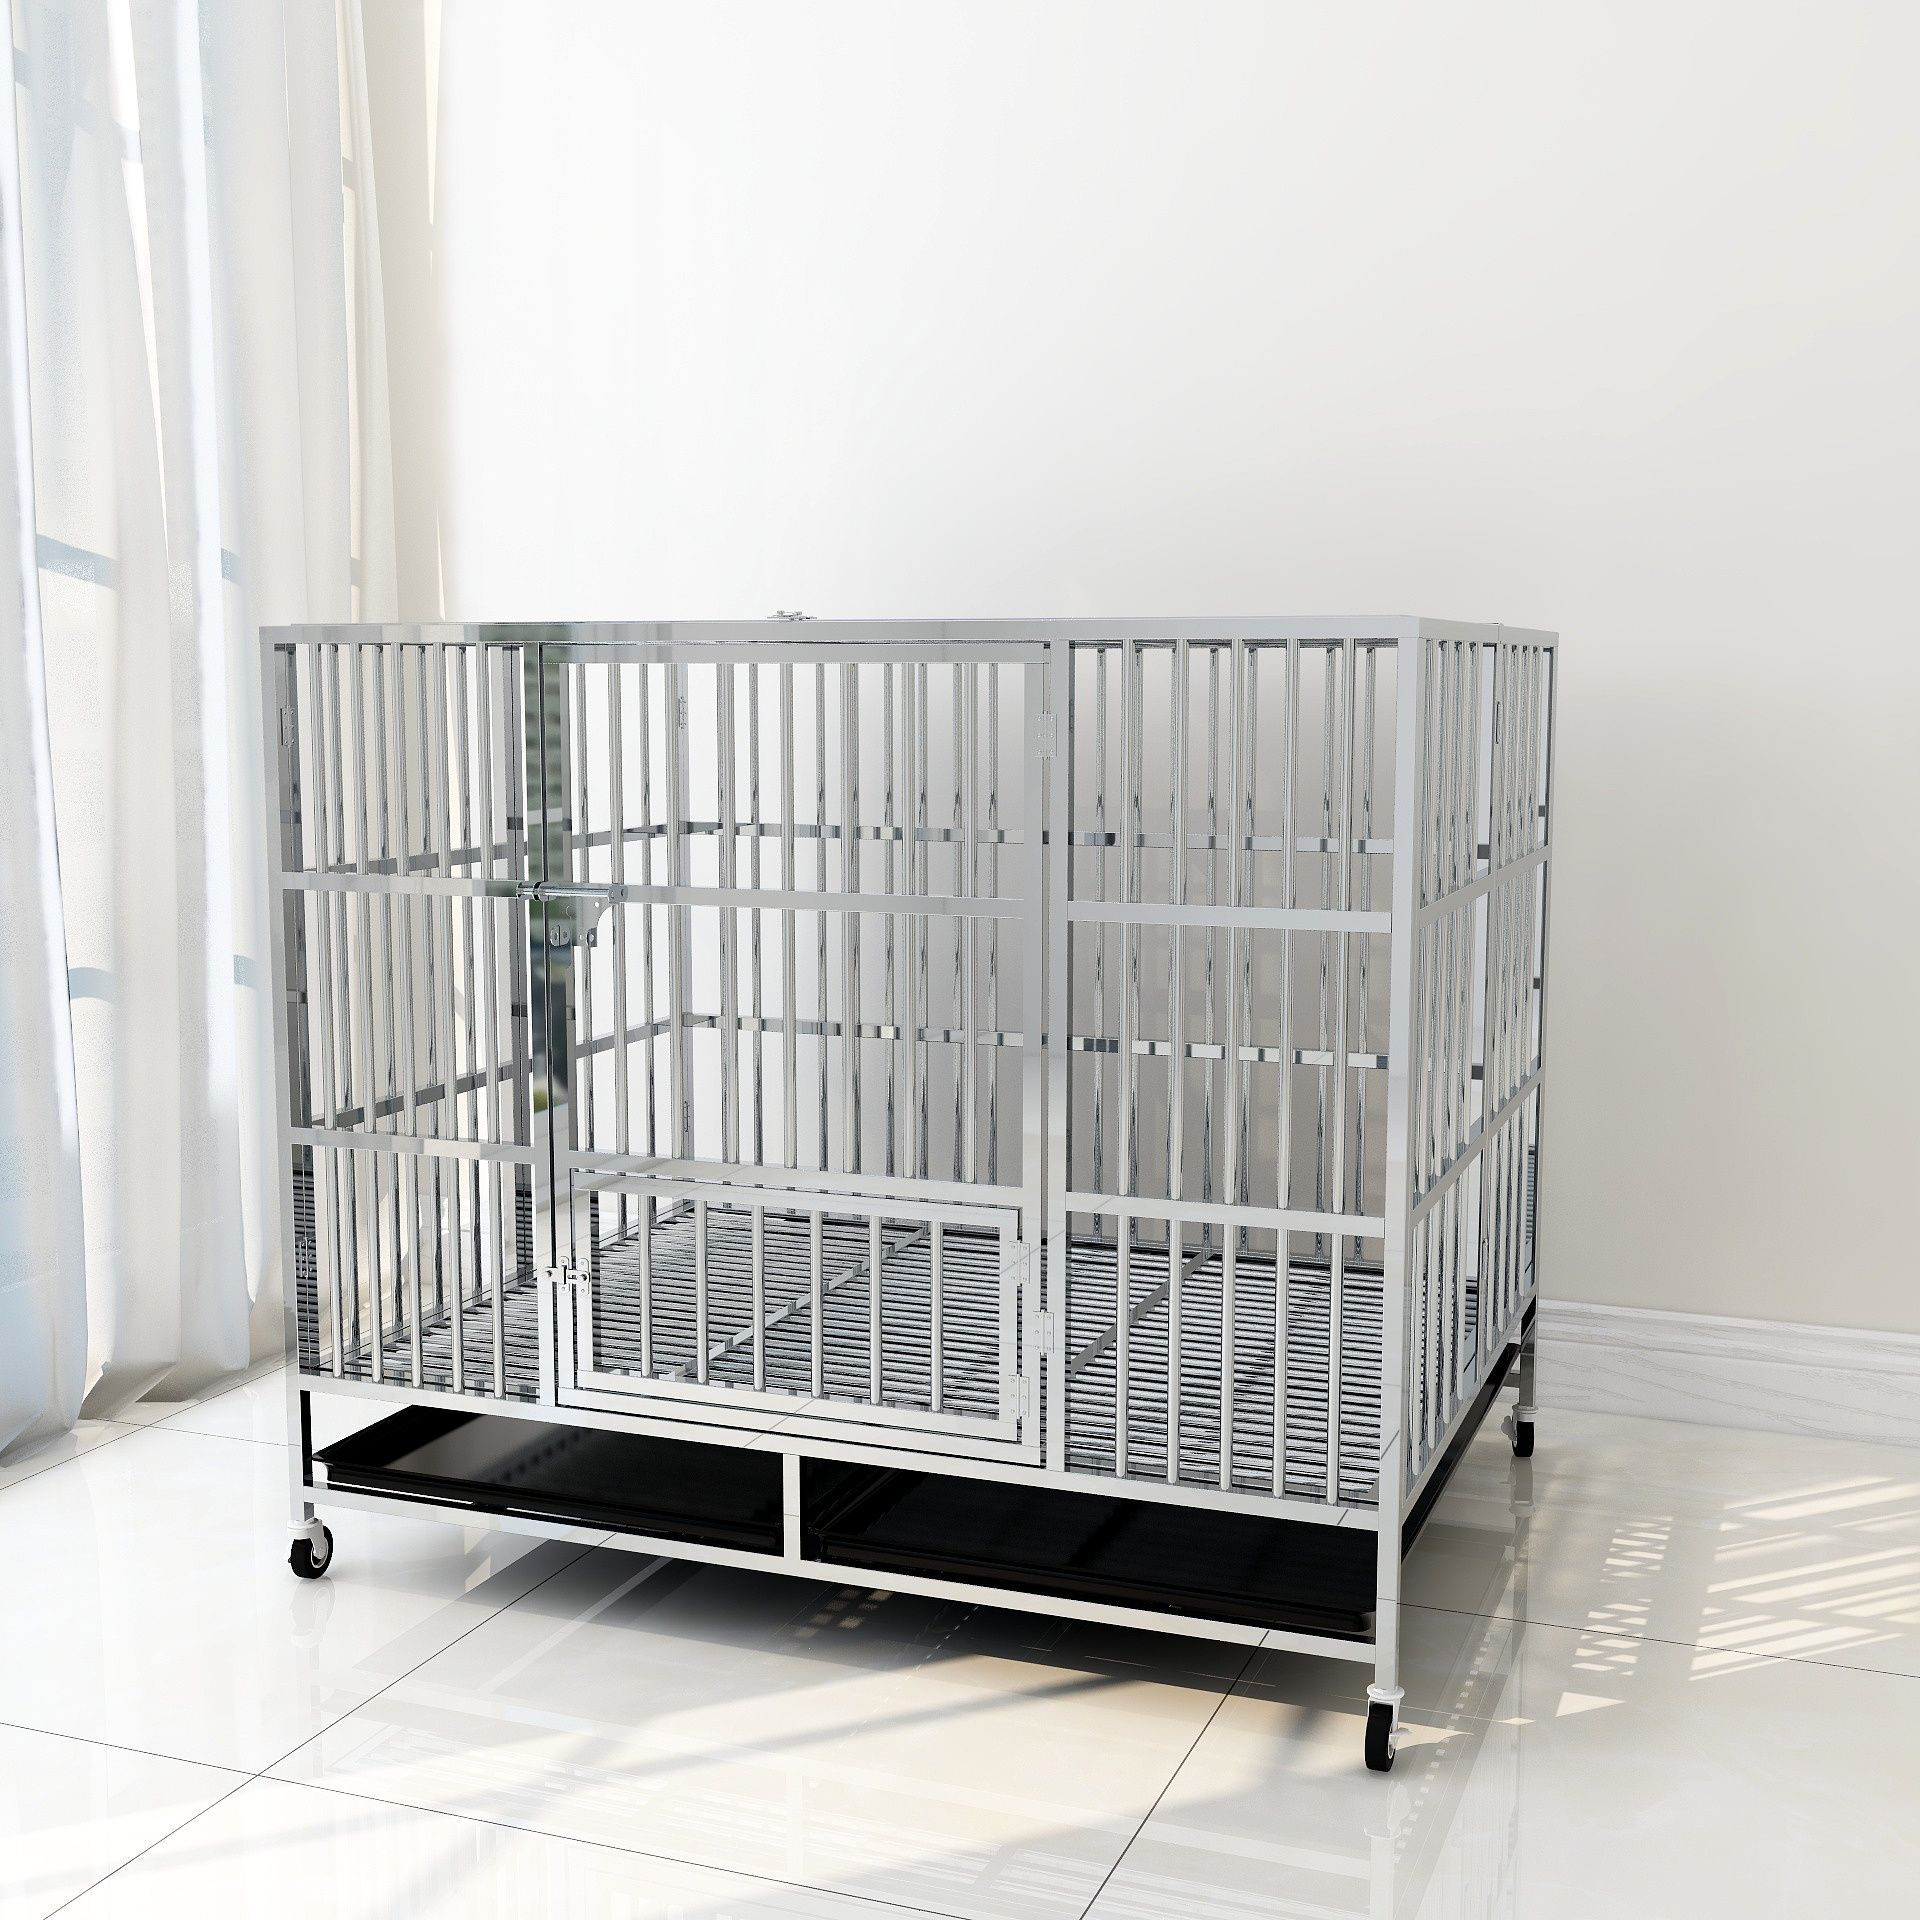 Dog Cage Large Dog Stainless Steel Dog Cage Folding Small Dog Square Kennel with Toilet Indoor Pet Cage Dropshipping